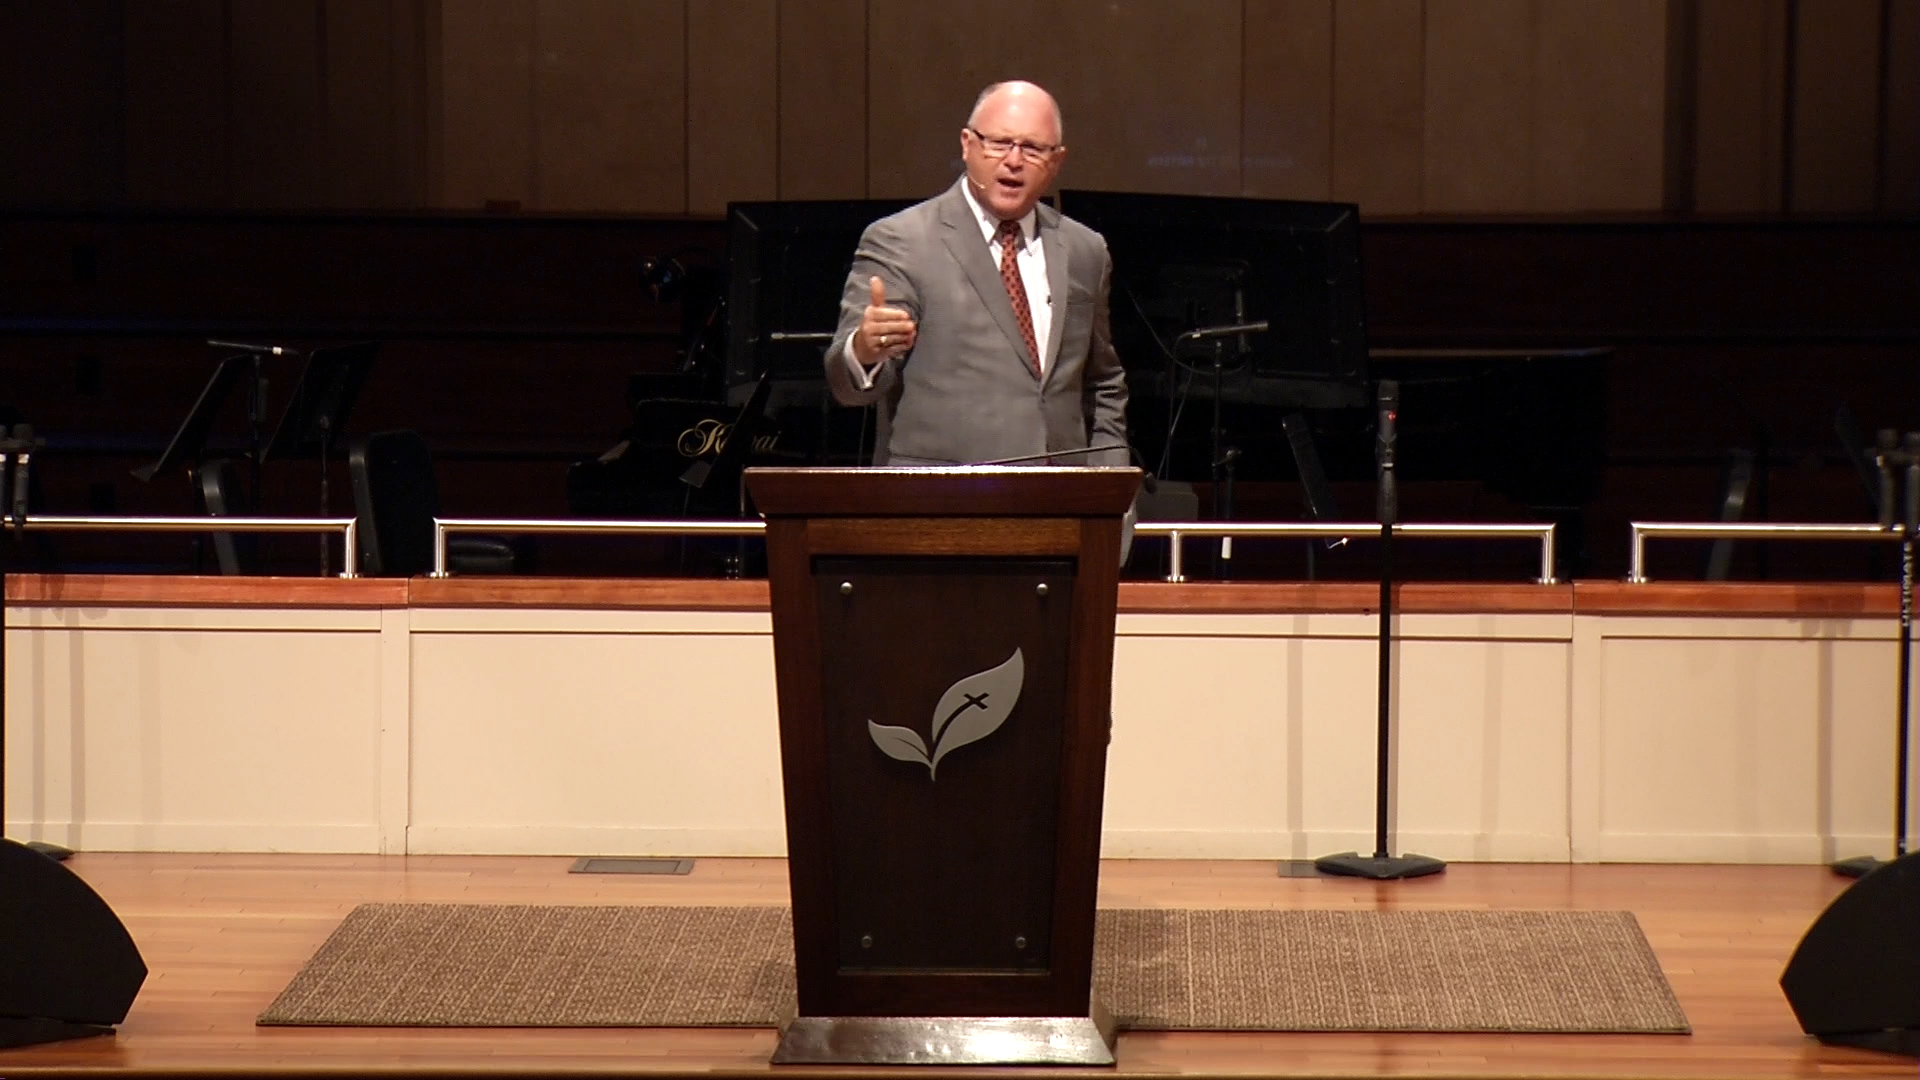 Pastor Paul Chappell: A Commitment of Grace